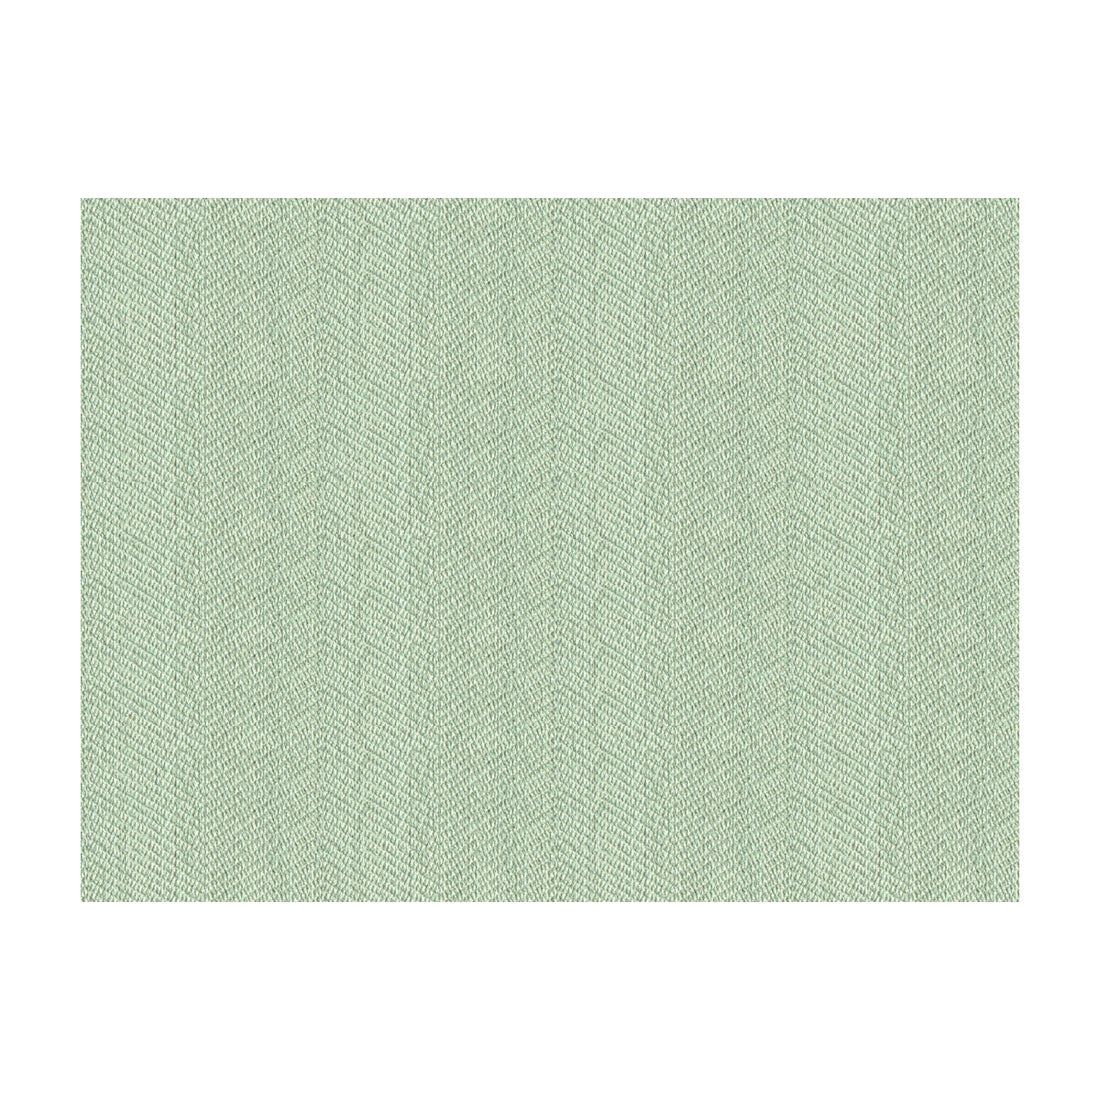 Kravet Contract fabric in 33877-135 color - pattern 33877.135.0 - by Kravet Contract in the Crypton Incase collection